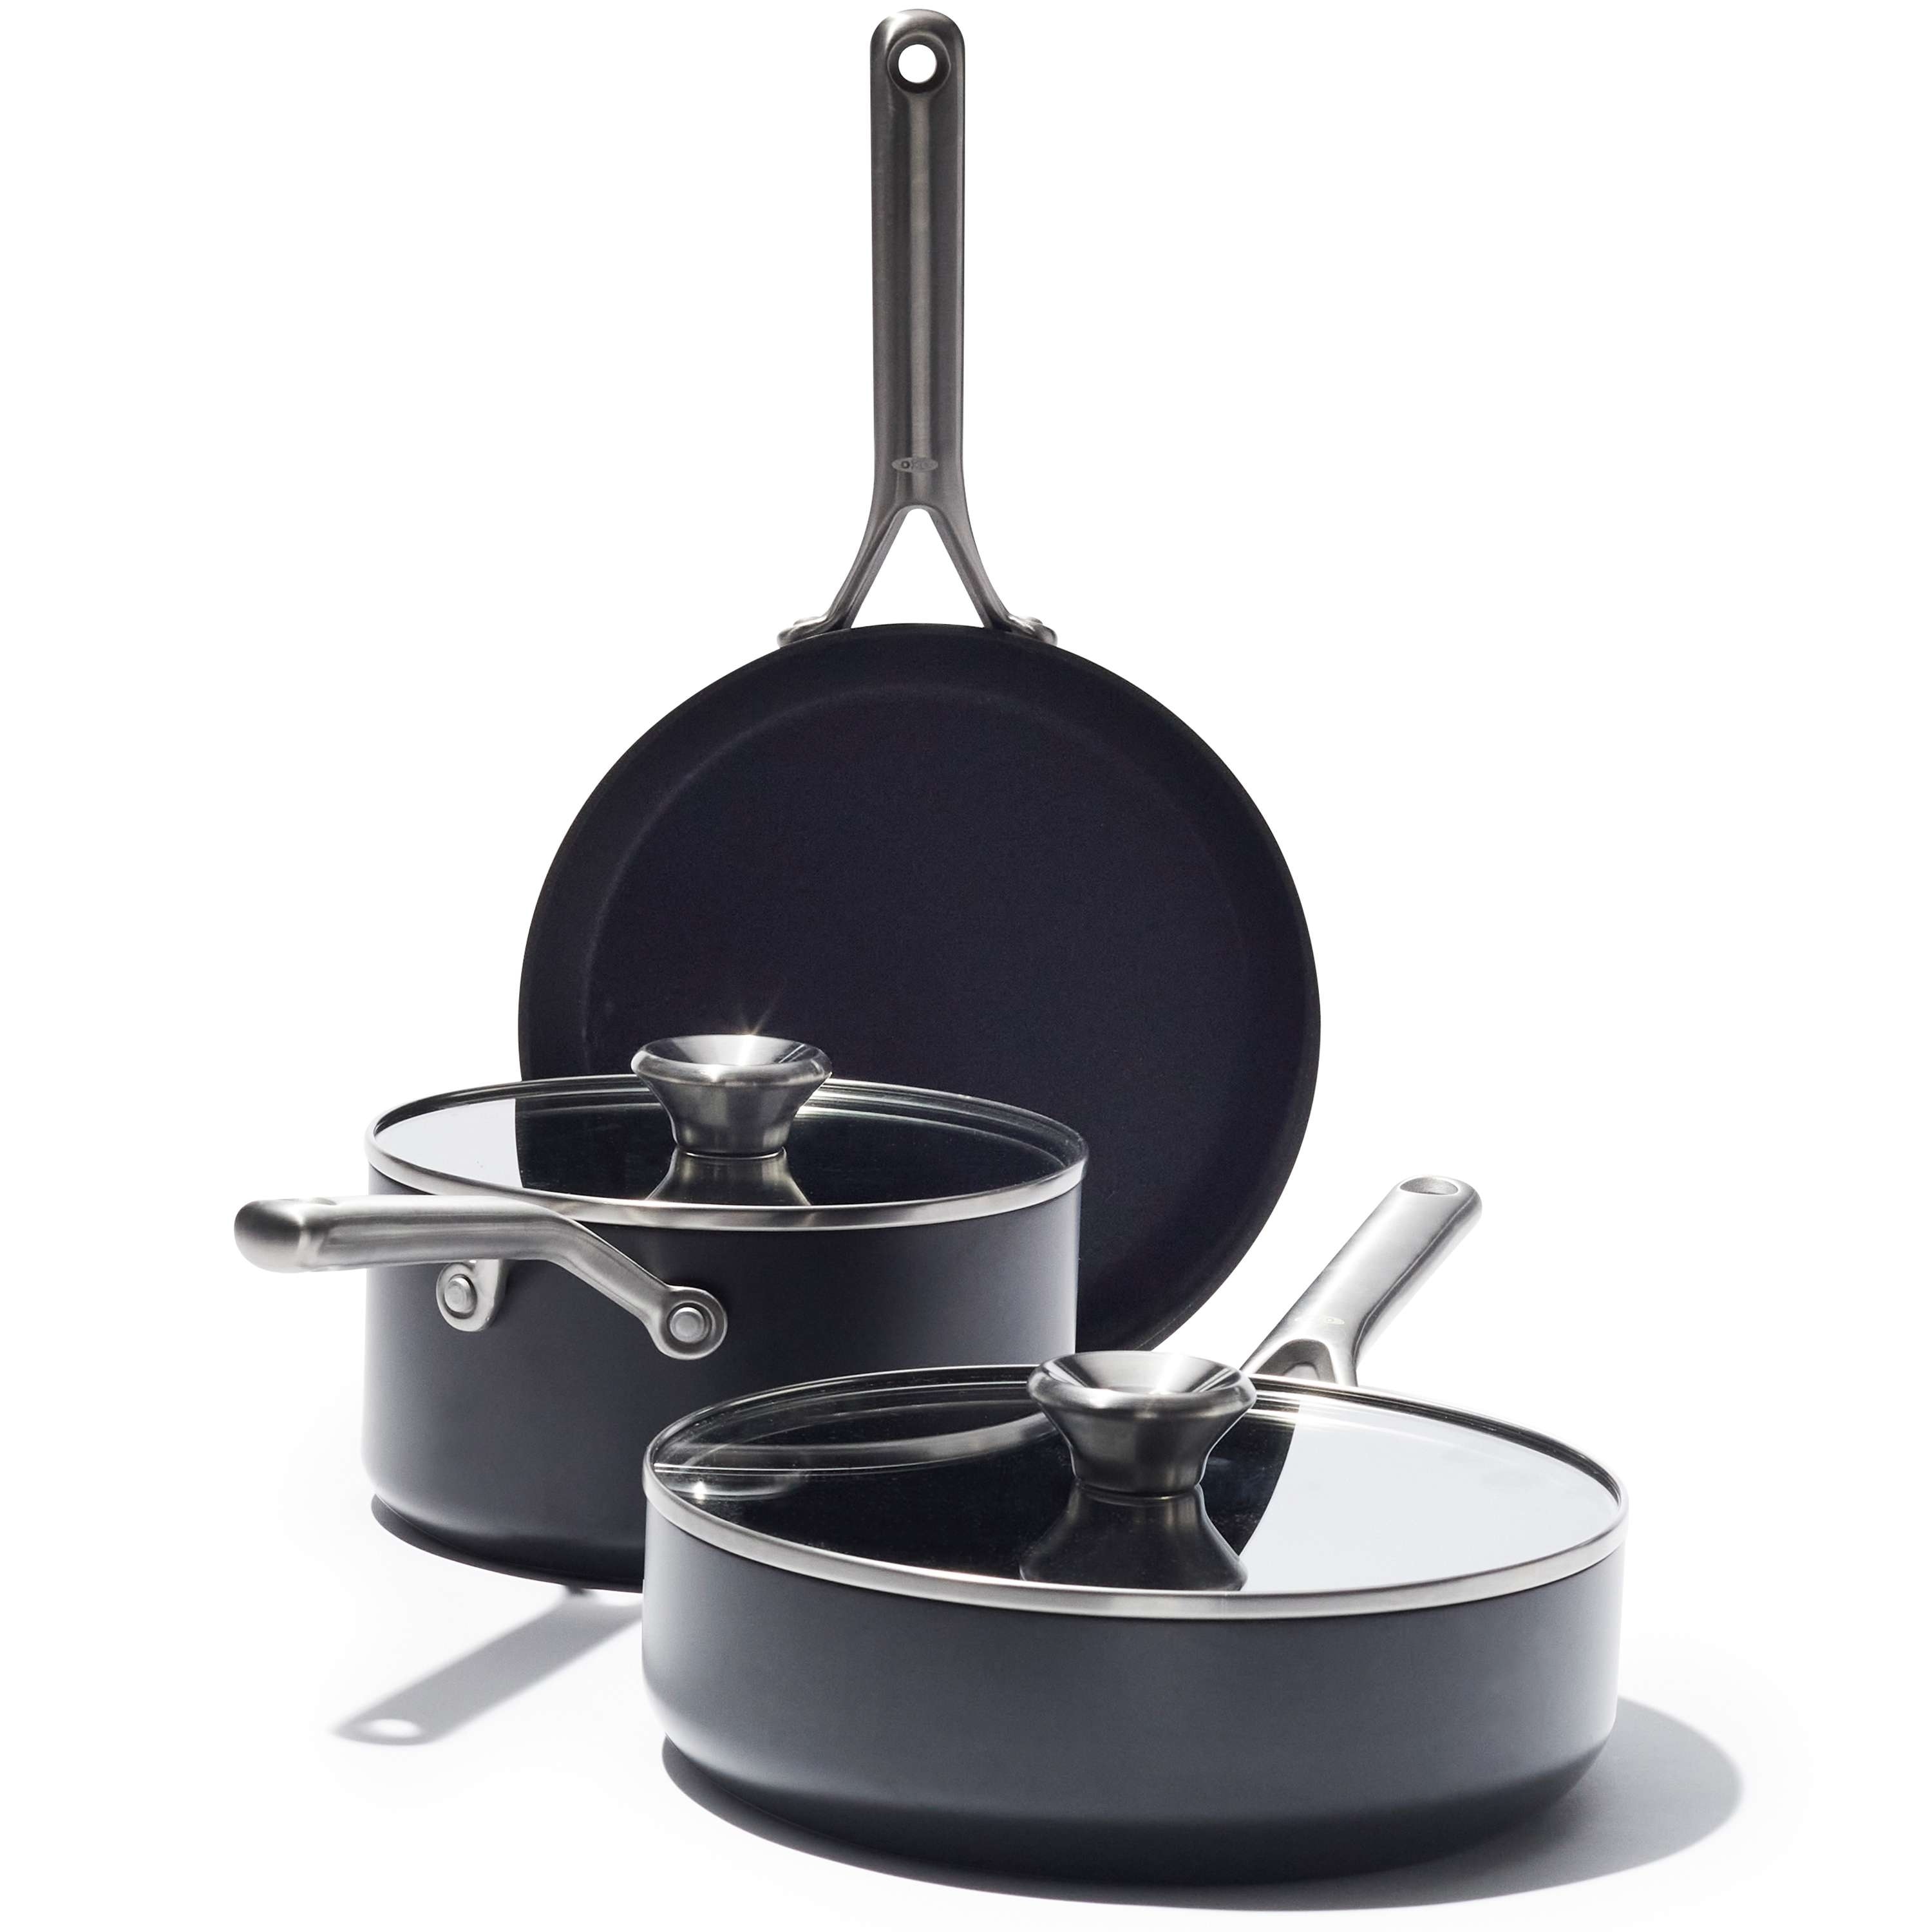 OXO Professional Ceramic Non-Stick 5-Piece Cookware Pots and Pans